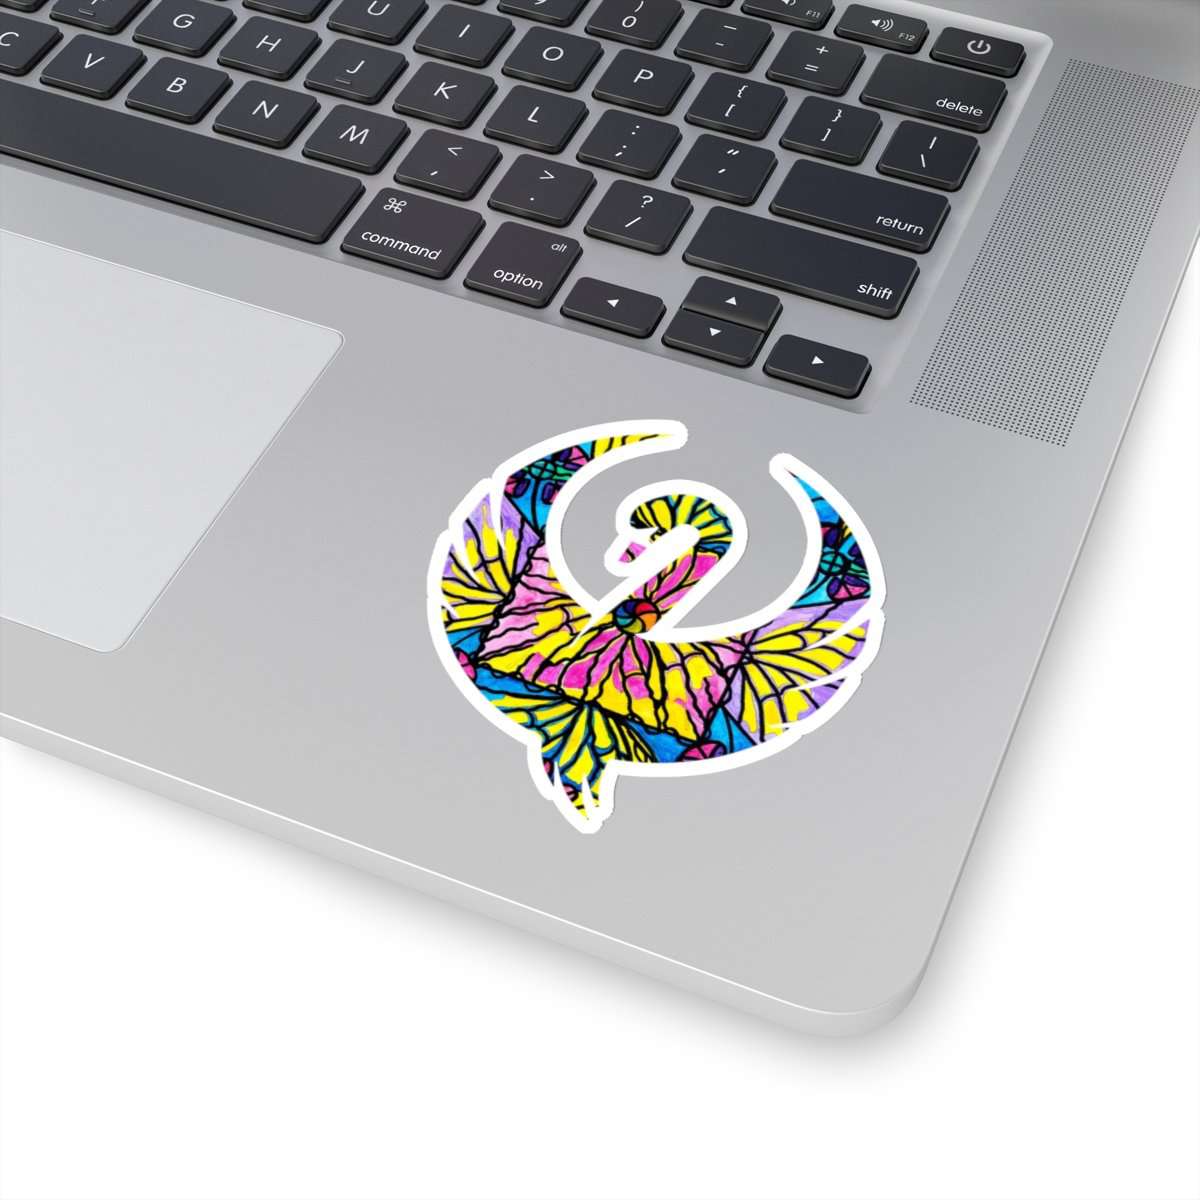 be-the-first-to-own-the-newest-beltane-swan-stickers-hot-on-sale_7.jpg